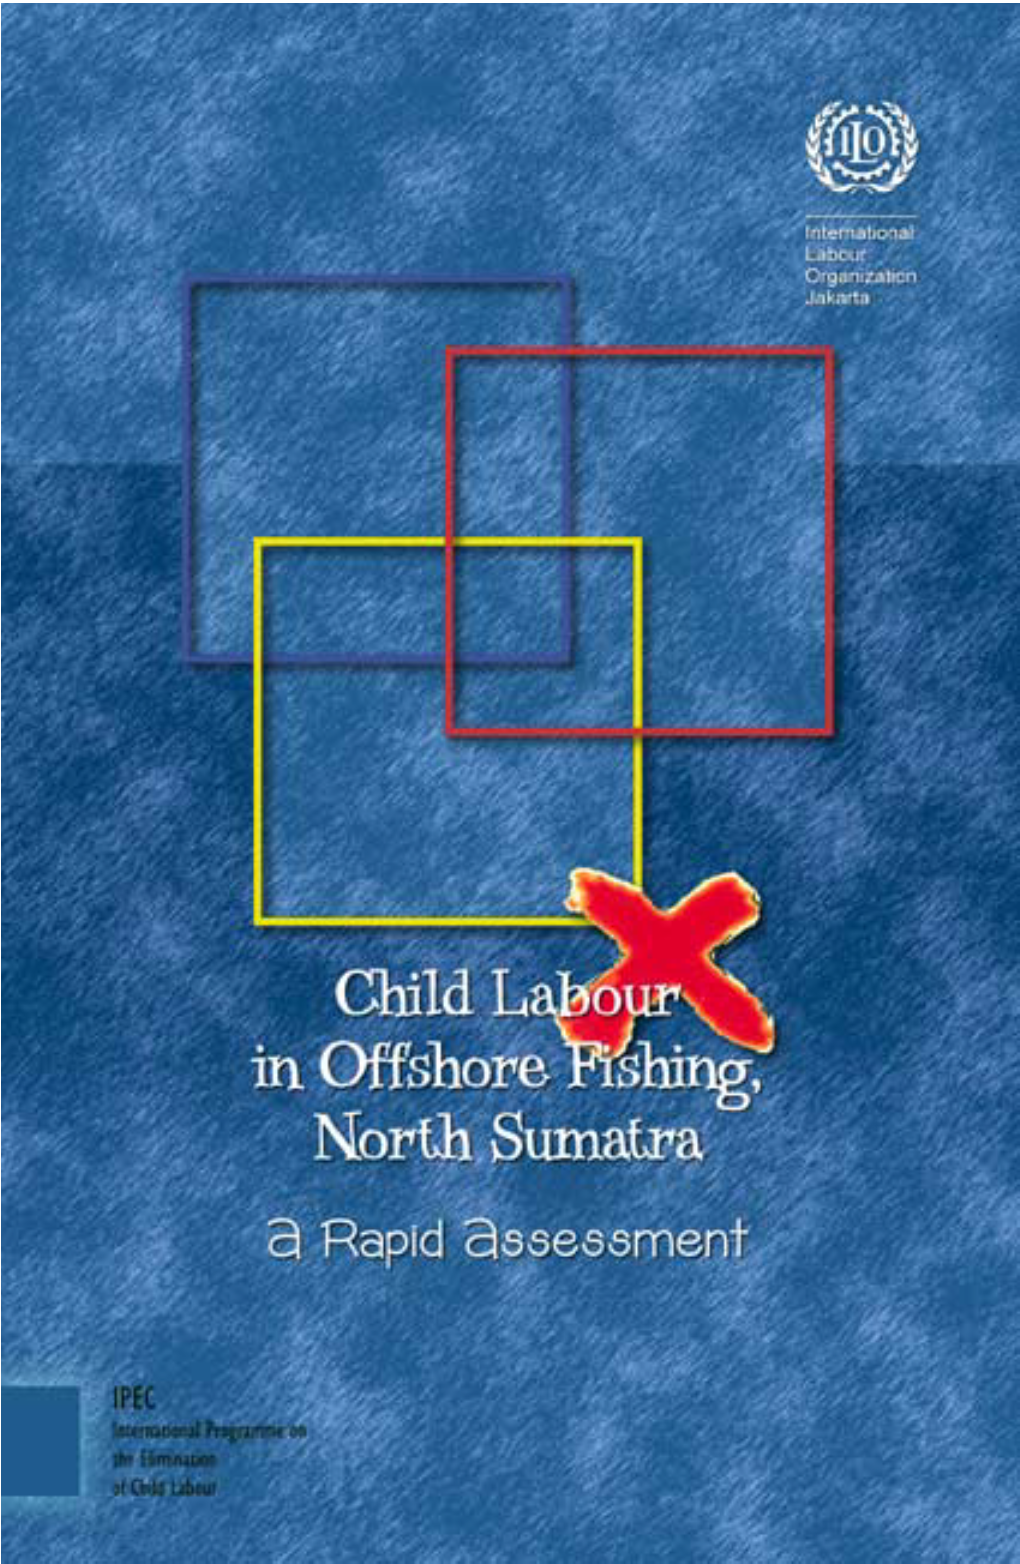 Child Labour in Offshore Fishing, North Sumatra